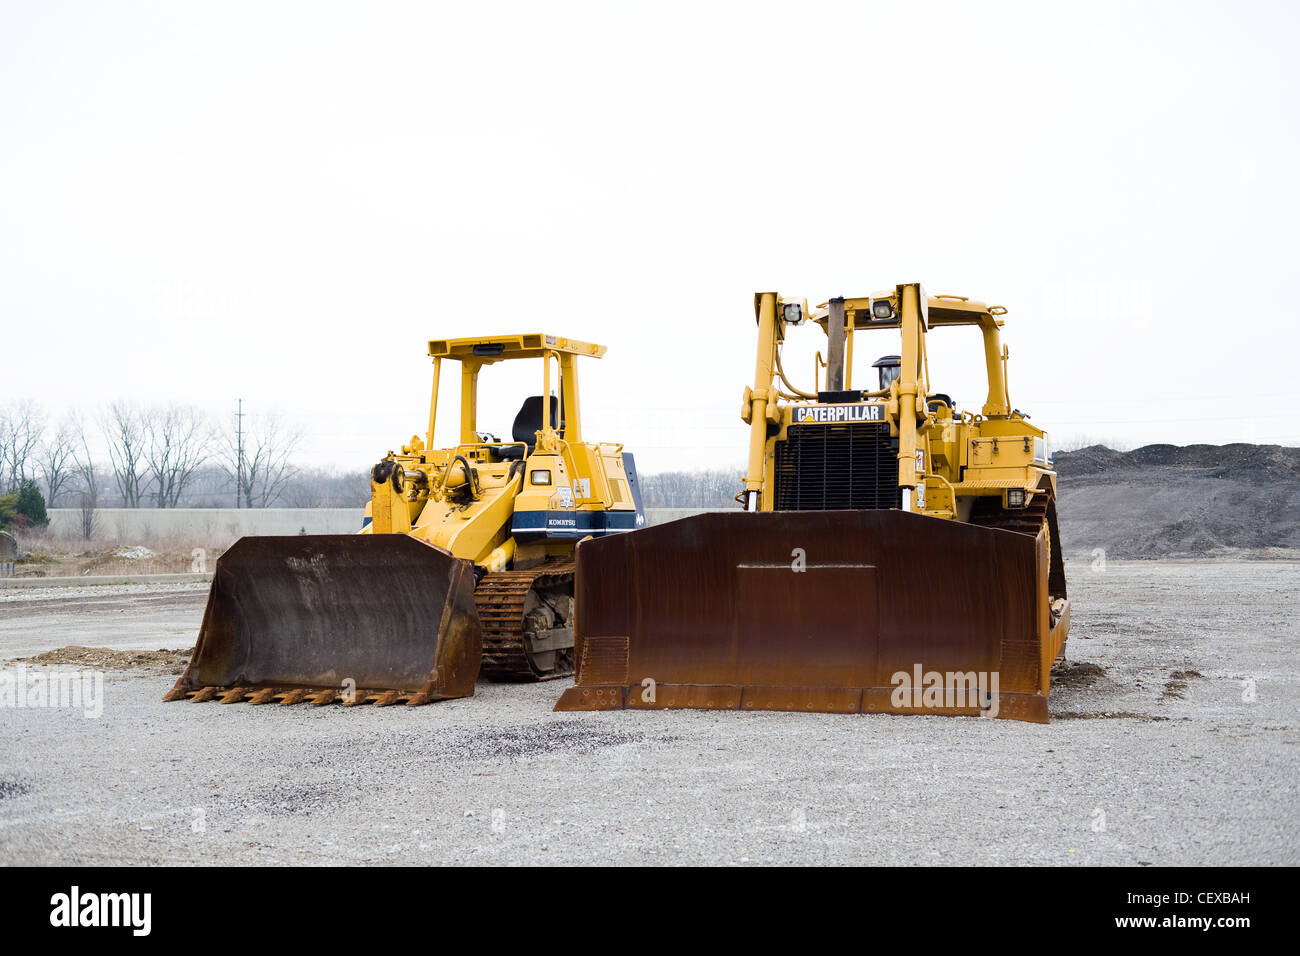 Two Bulldozers sitting at a construction site Stock Photo